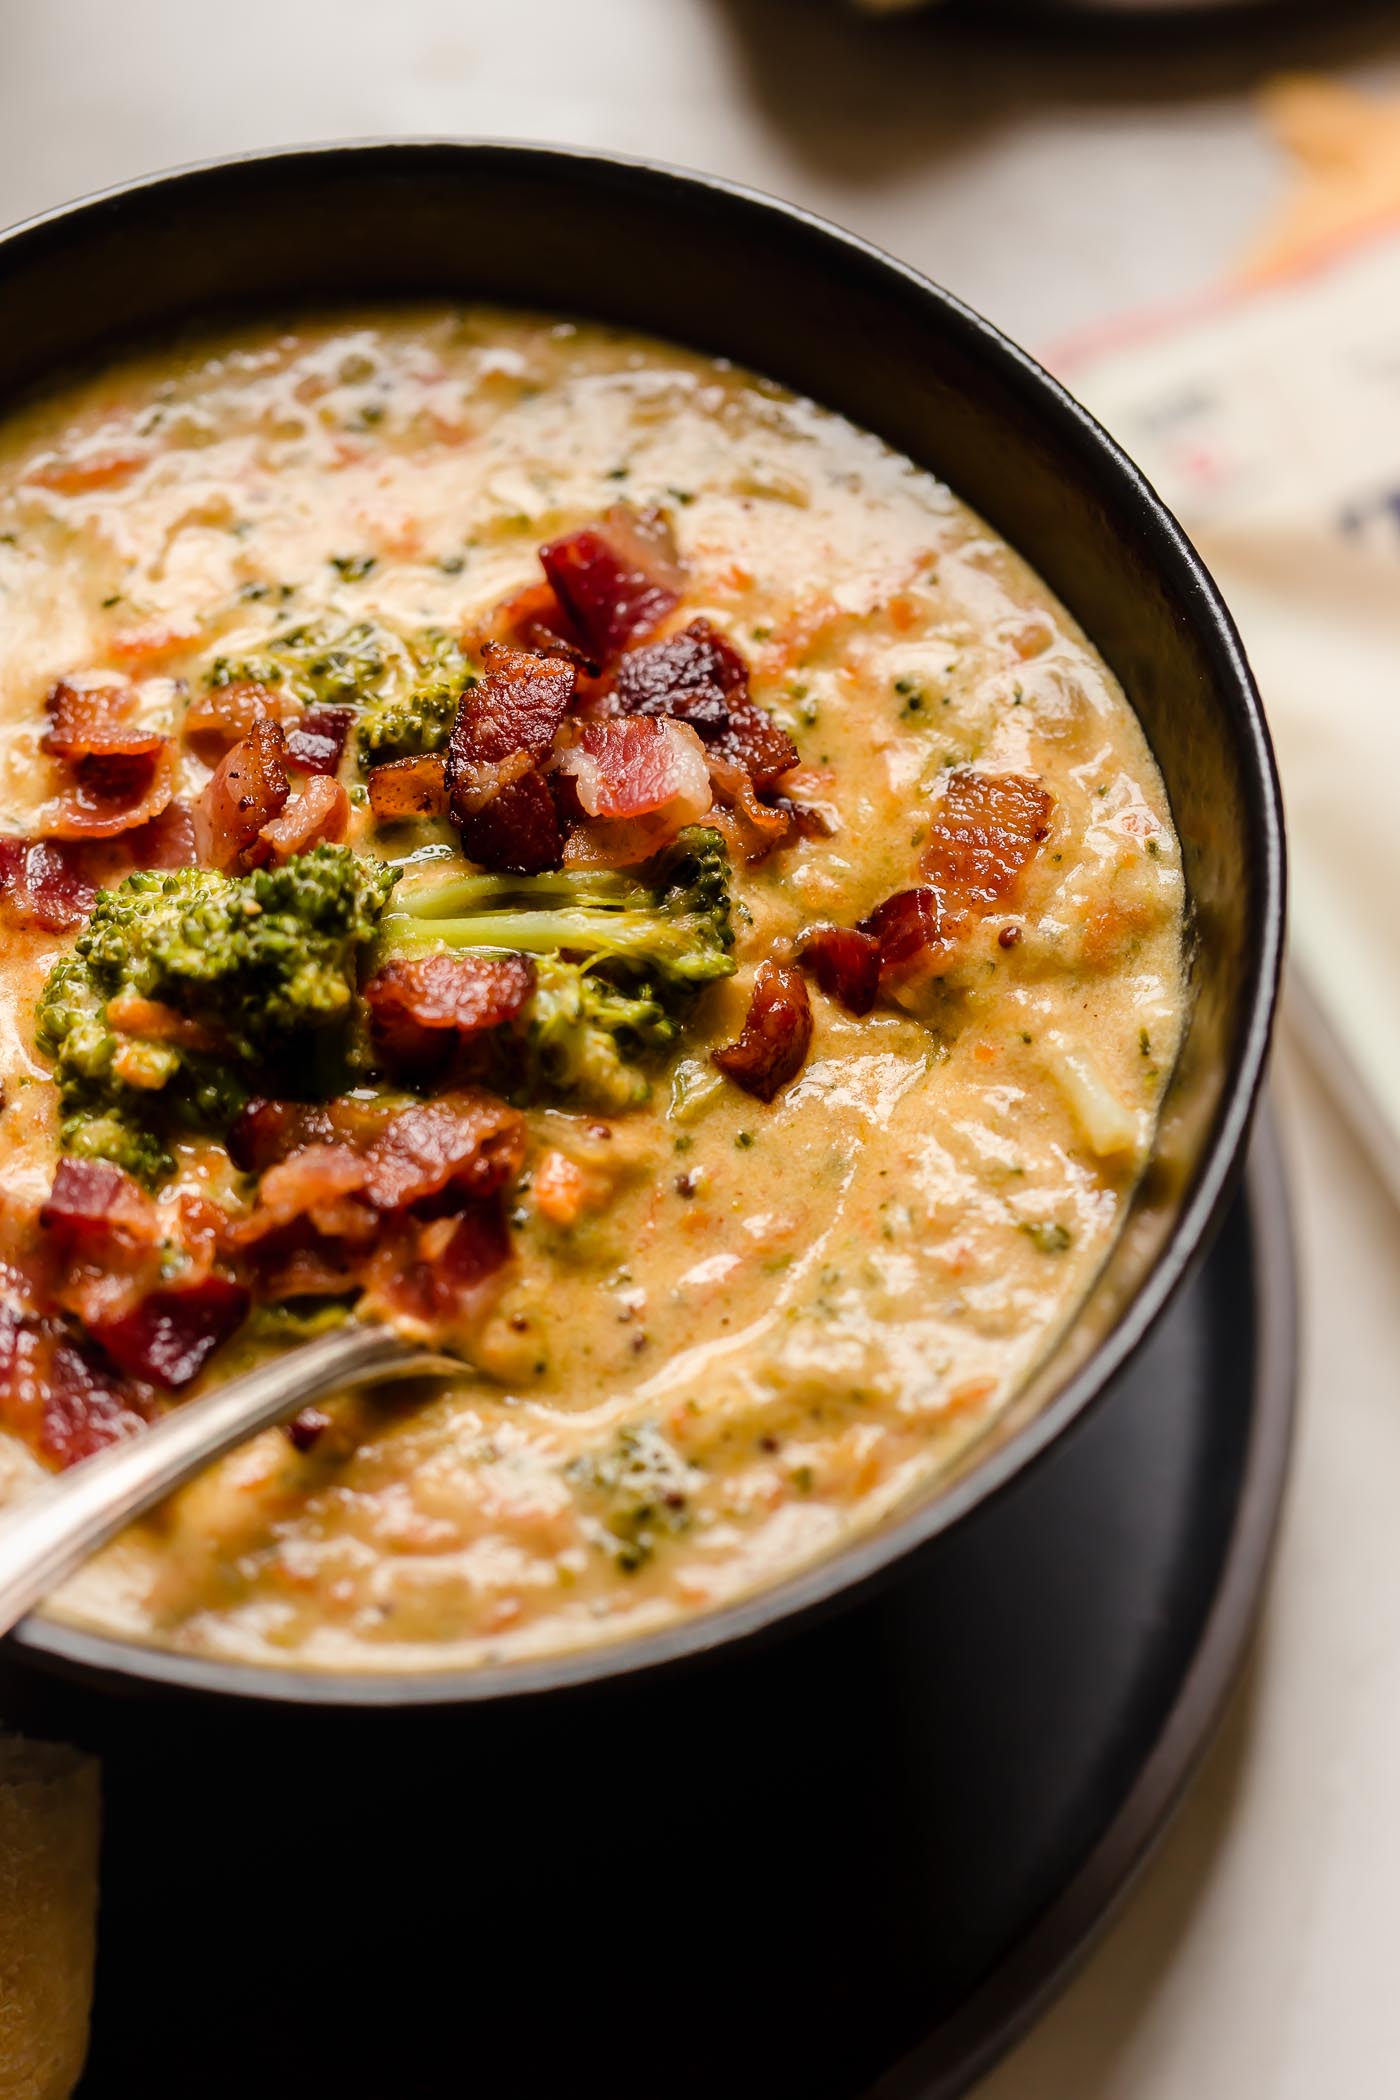 bacon beer cheese broccoli cheddar soup. a cross between two classic comforting soups, beer cheese soup & broccoli cheese soup, this bacon beer cheese broccoli cheddar soup is thick, luscious, creamy, & decadent. the ultimate comfort food dinner to warm you up on a cold night this winter! #playswellwithbutter #broccolicheddarsoup #broccolicheesesoup #bestbroccolicheesesoup #creamybroccolicheesesoup #beercheesesoup #bestbeercheesesoup #baconbeercheesesoup #comfortfood #comfortfoodrecipes